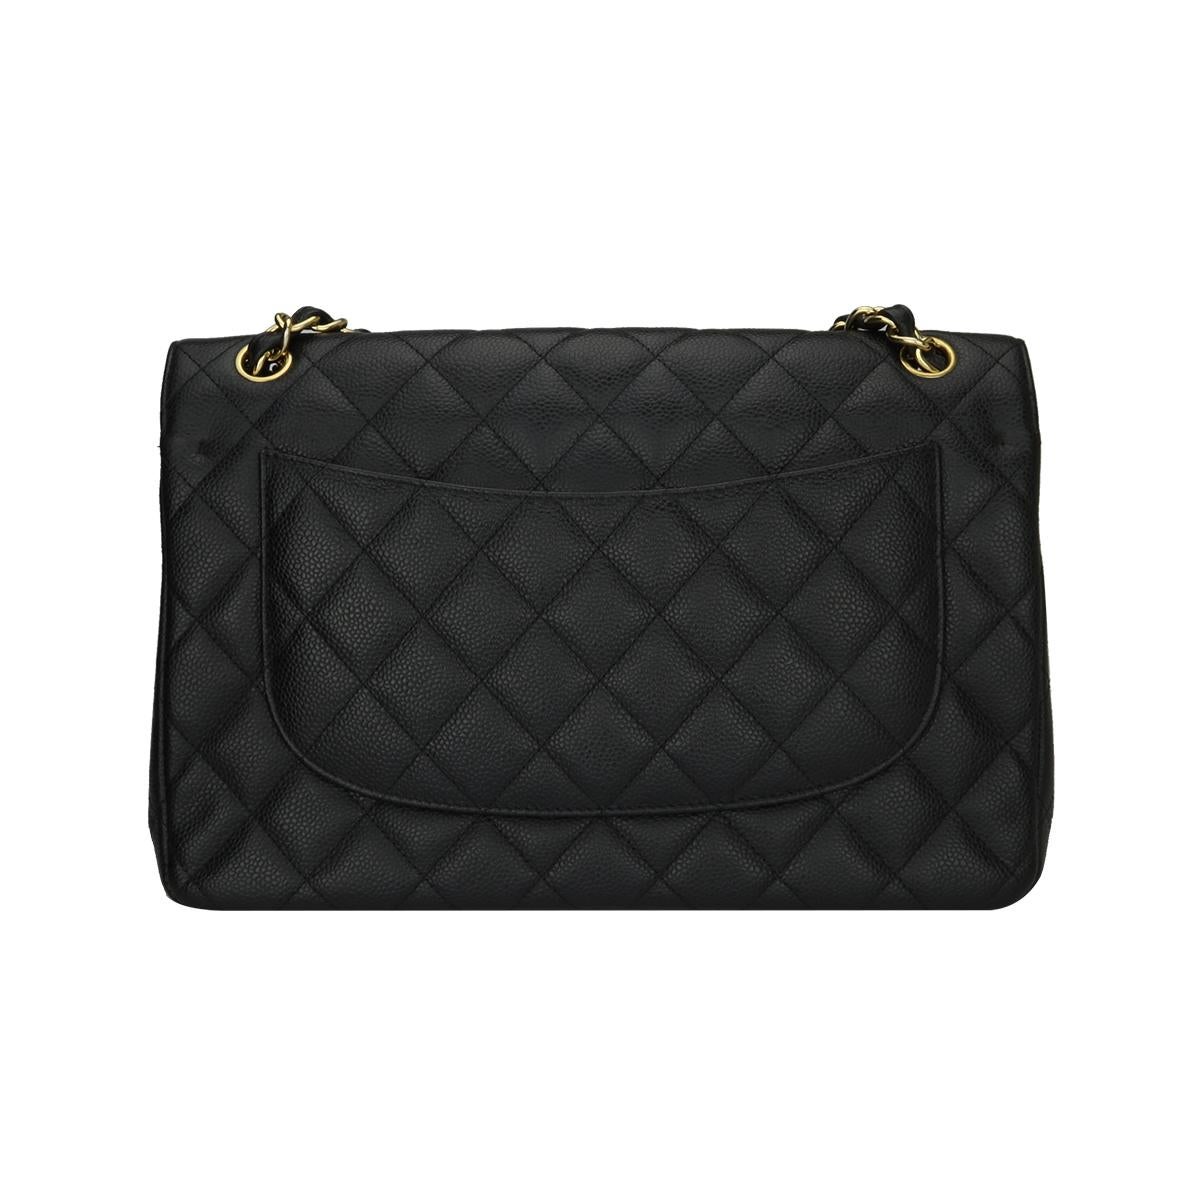 Women's or Men's CHANEL Classic Jumbo Double Flap Black Caviar with Gold Hardware 2012